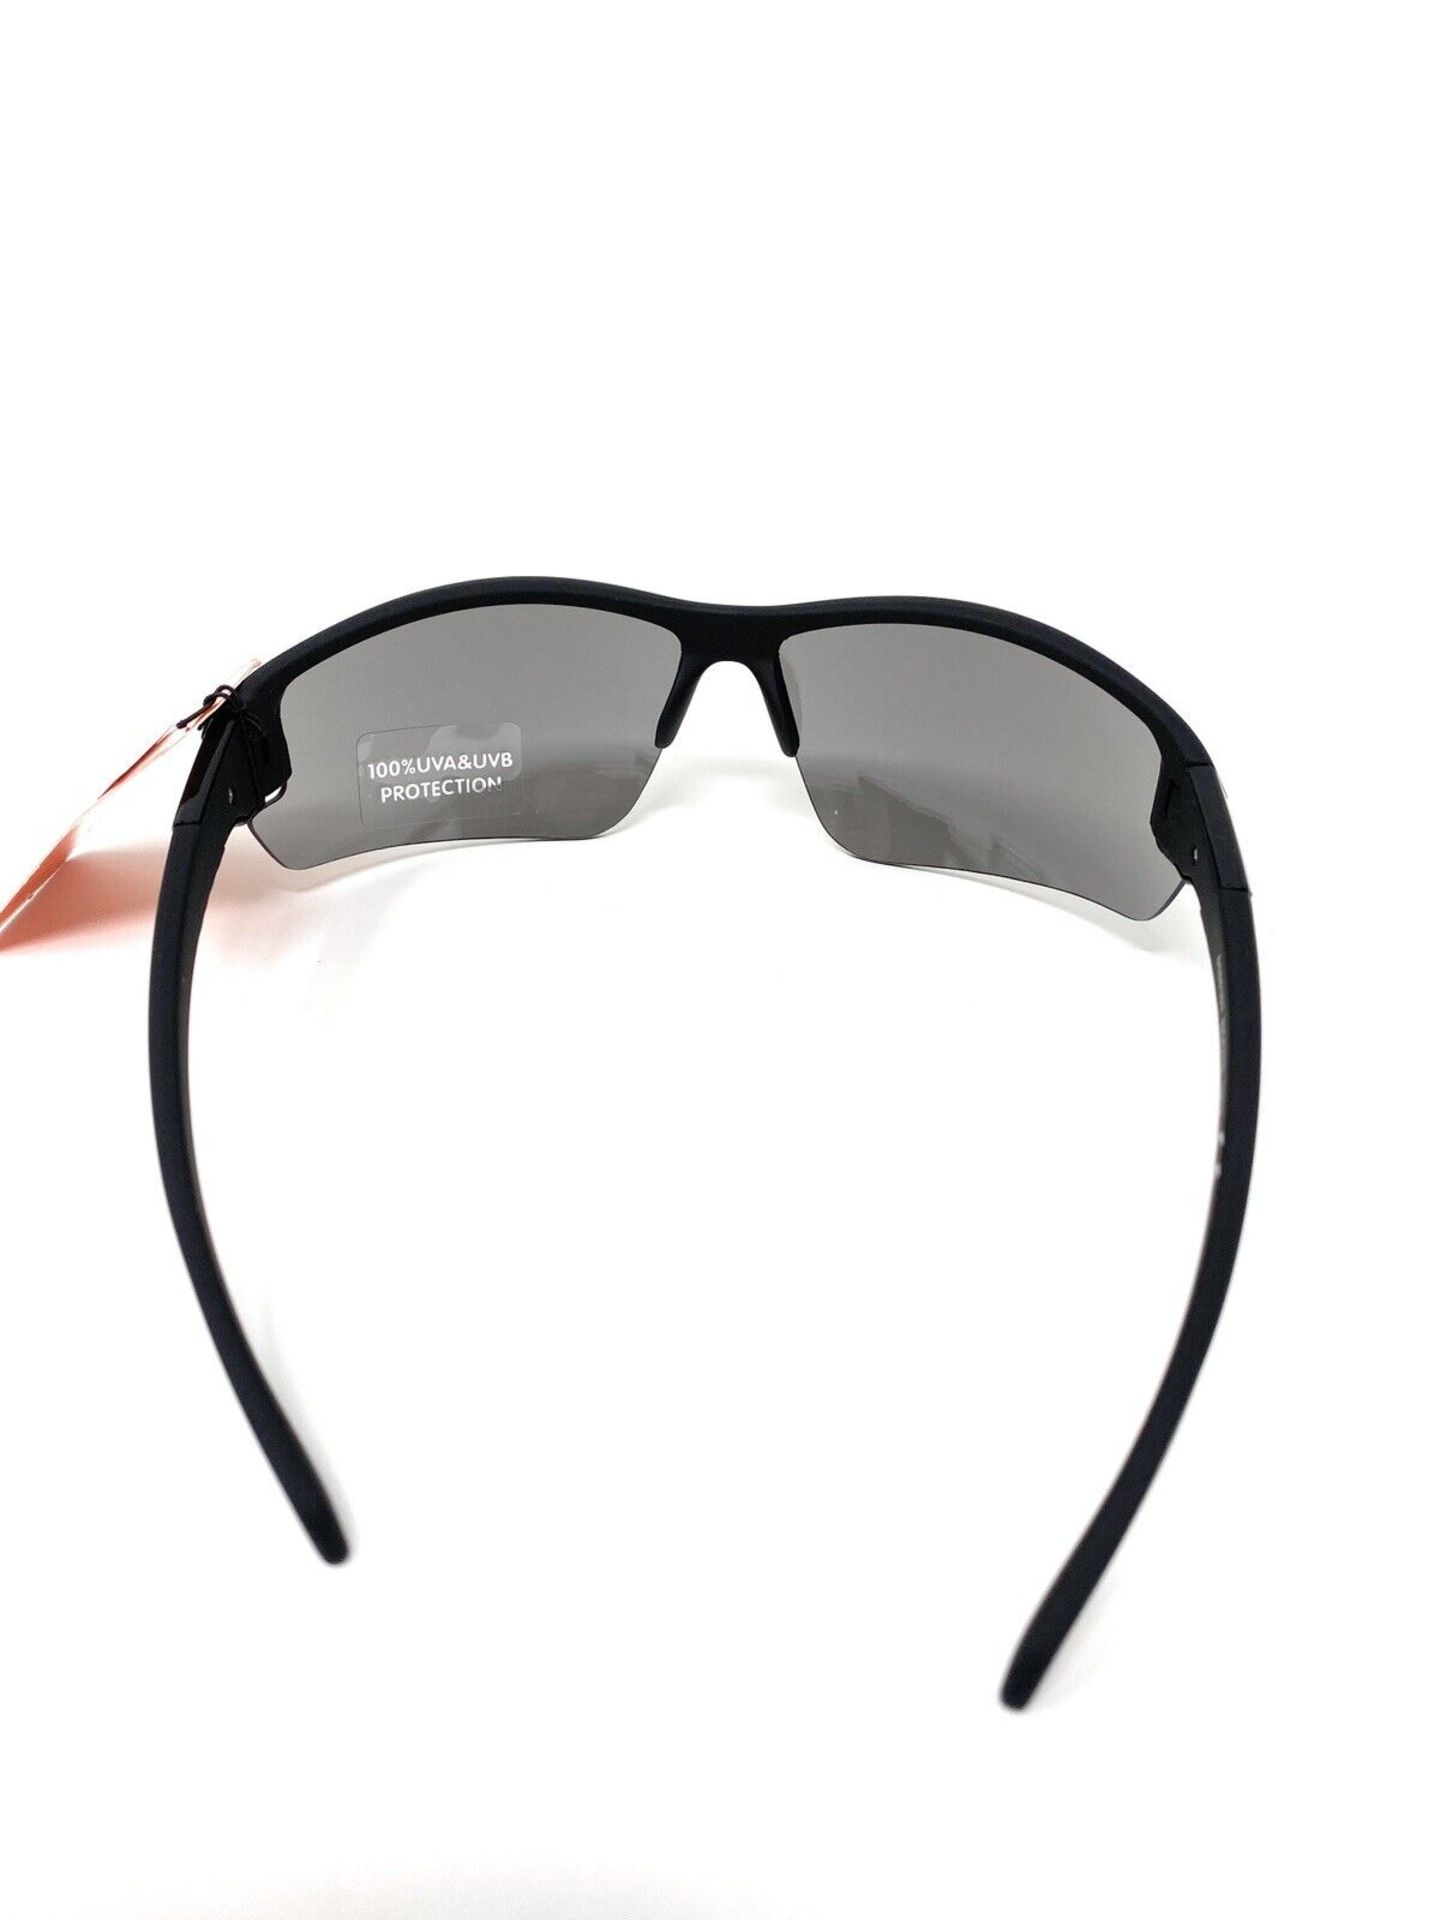 40 x Boots Active Sports Styled Sunglasses 100% UVA - (NEW) - BOOTS RRP Â£1,000 ! - Image 5 of 5